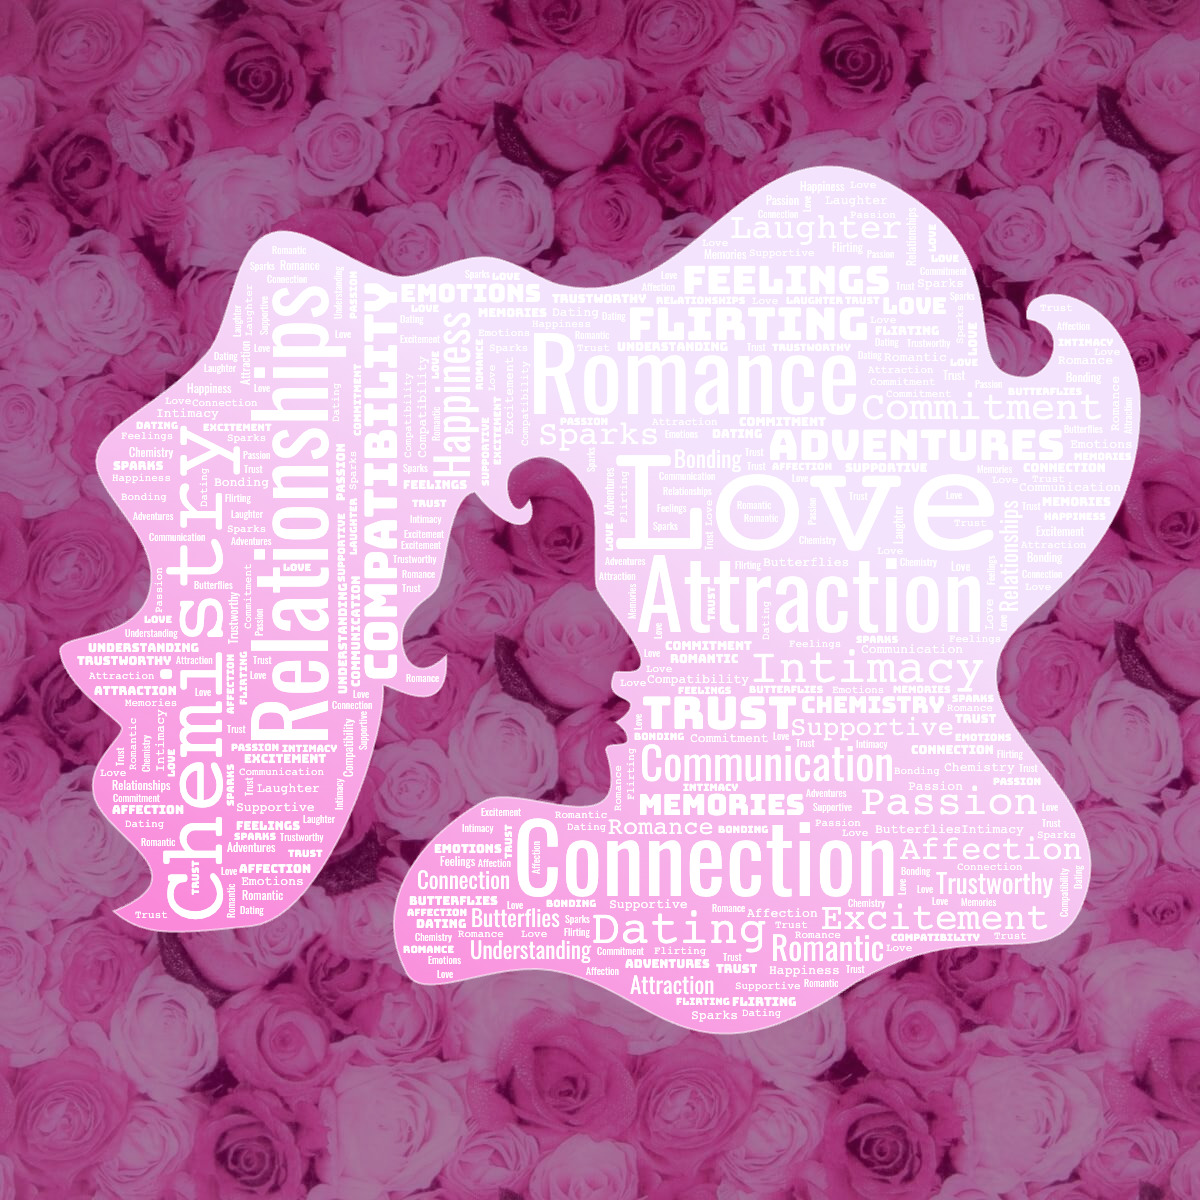 A word cloud about dating, in the shape of a woman's silhouette on a background of roses